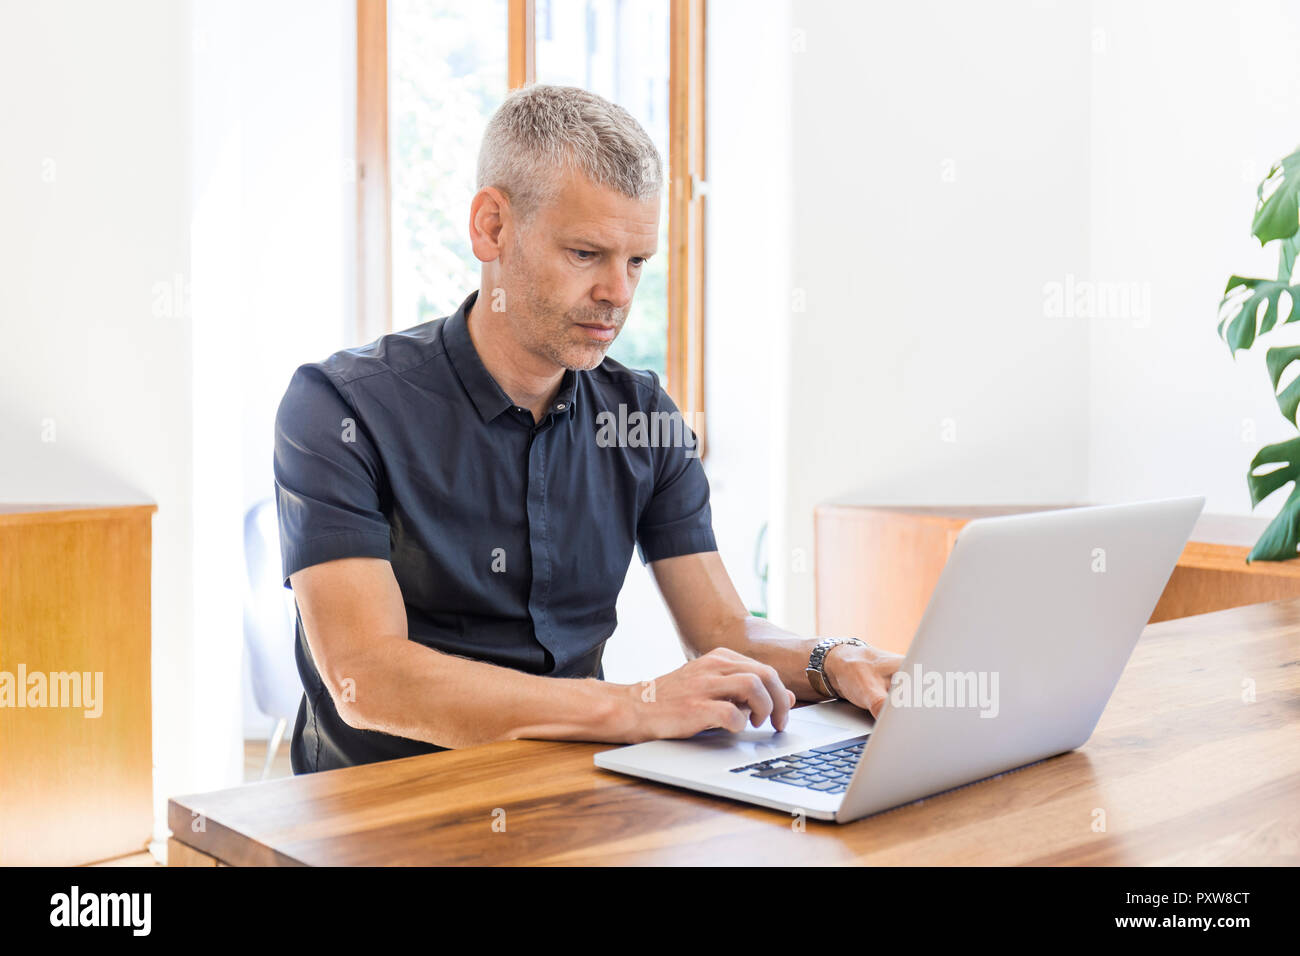 Mature man using laptop on wooden table Stock Photo